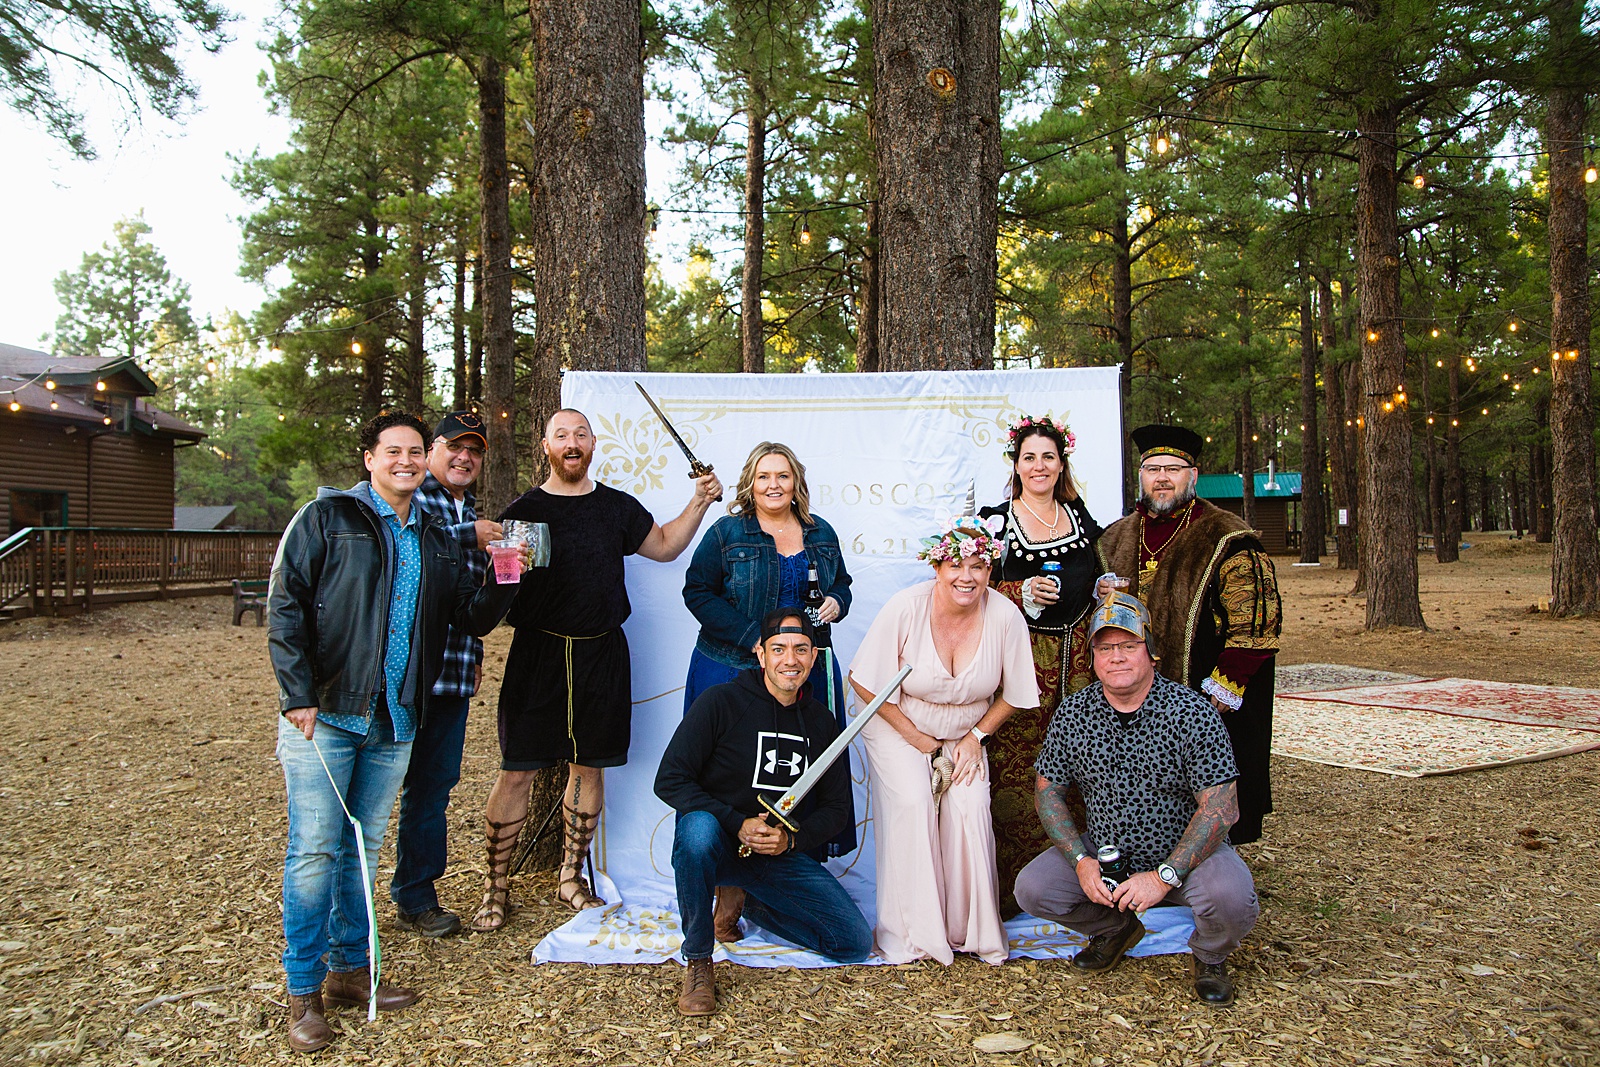 Guests pose at a fairy tale inspired DIY photo booth by Arizona wedding photographer PMA Photography.